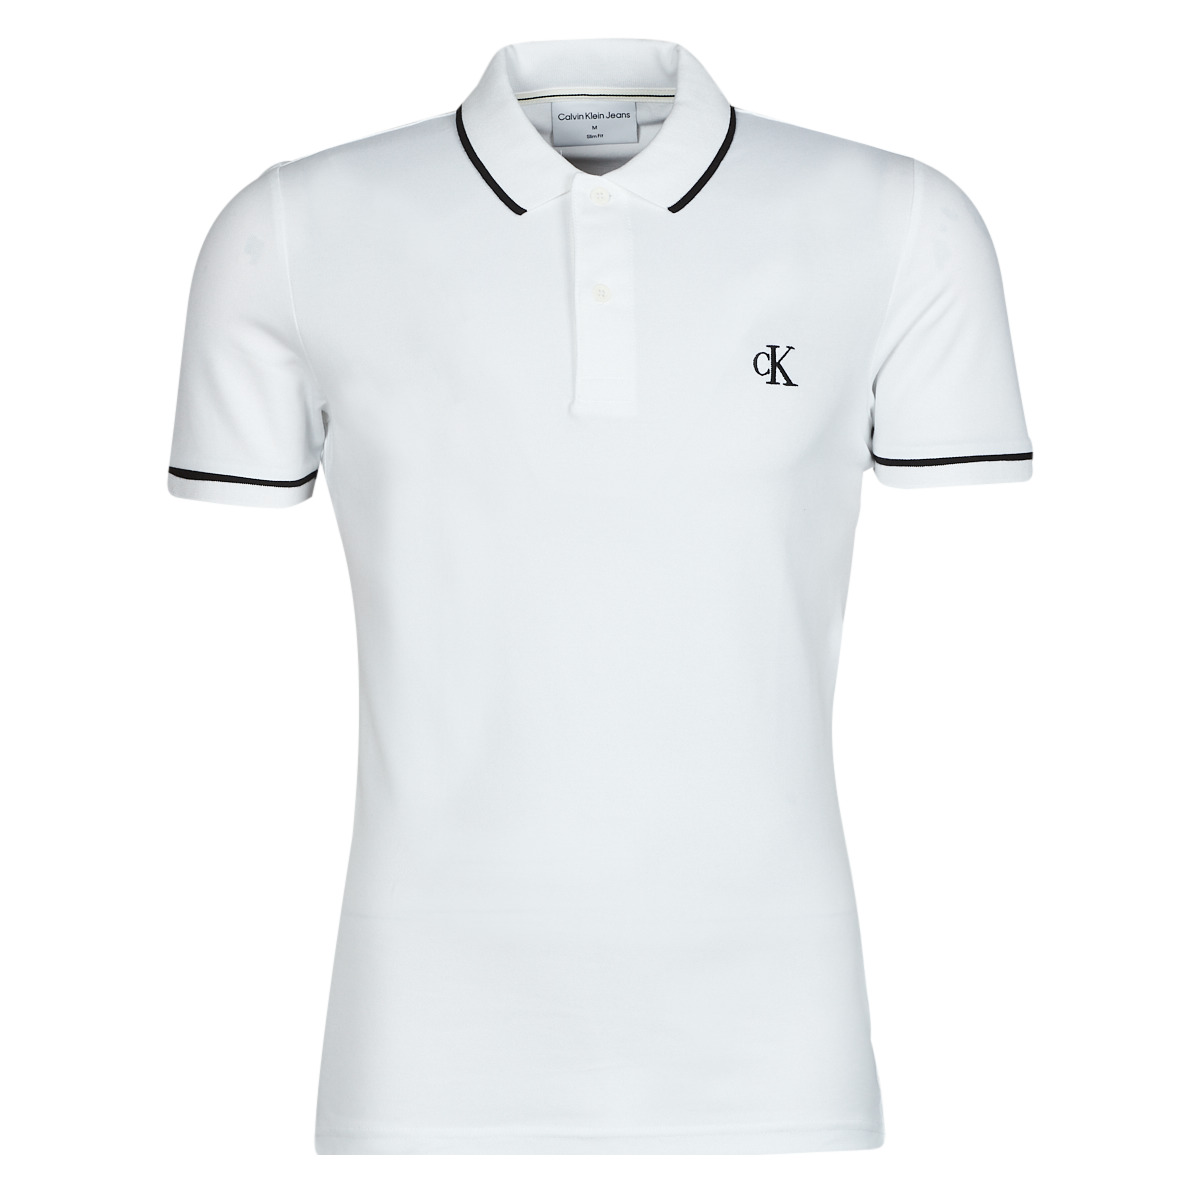 Calvin Klein TIPPING ! Spartoo Free Black Clothing - - NET Jeans SLIM White short-sleeved | delivery shirts Men POLO polo 